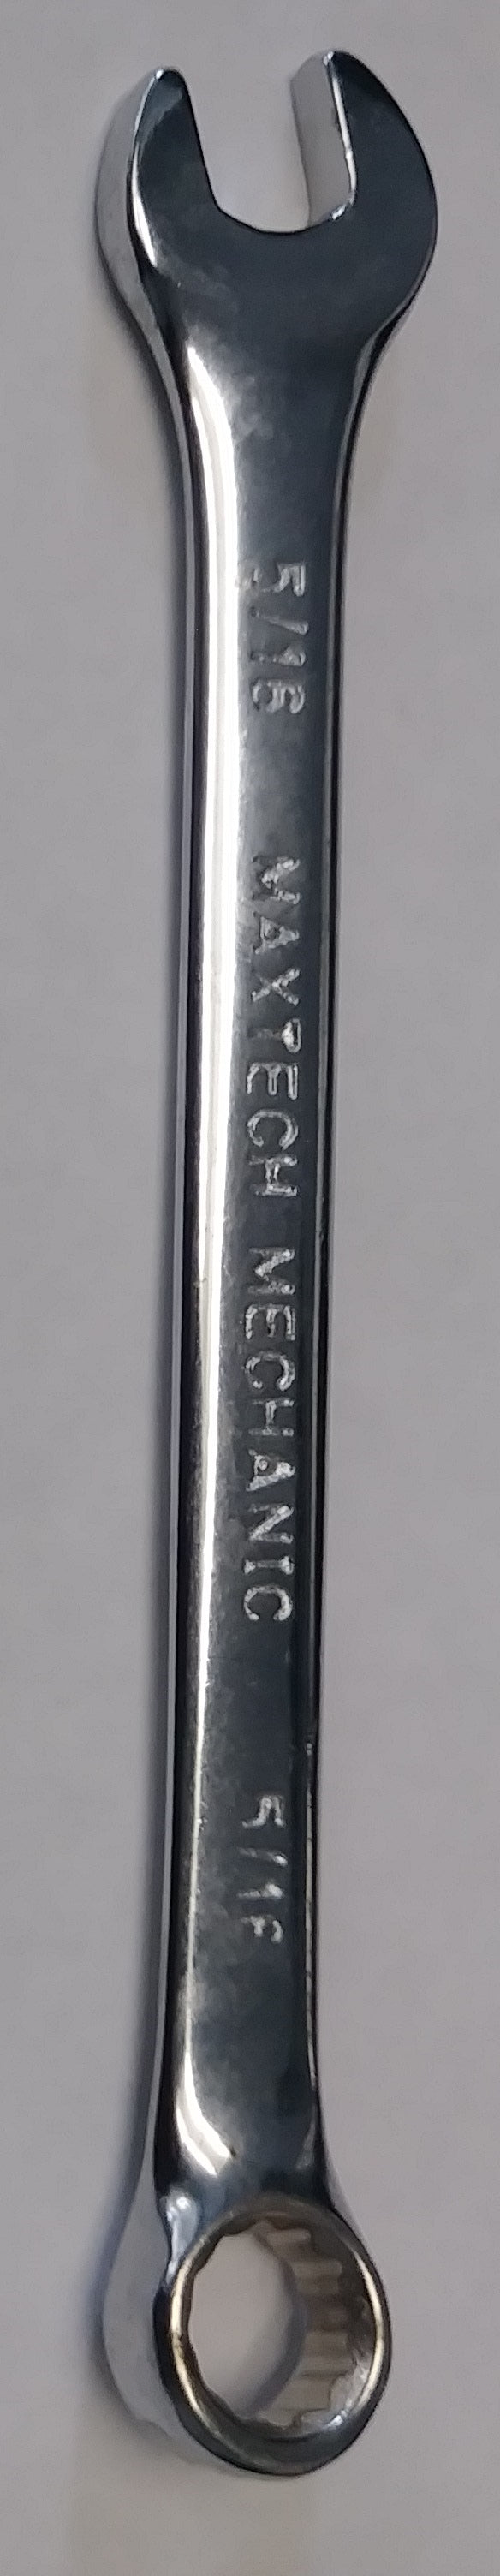 Maxtech Mechanic 5/16" Combination Wrench 12 Point (Deb's Cart)